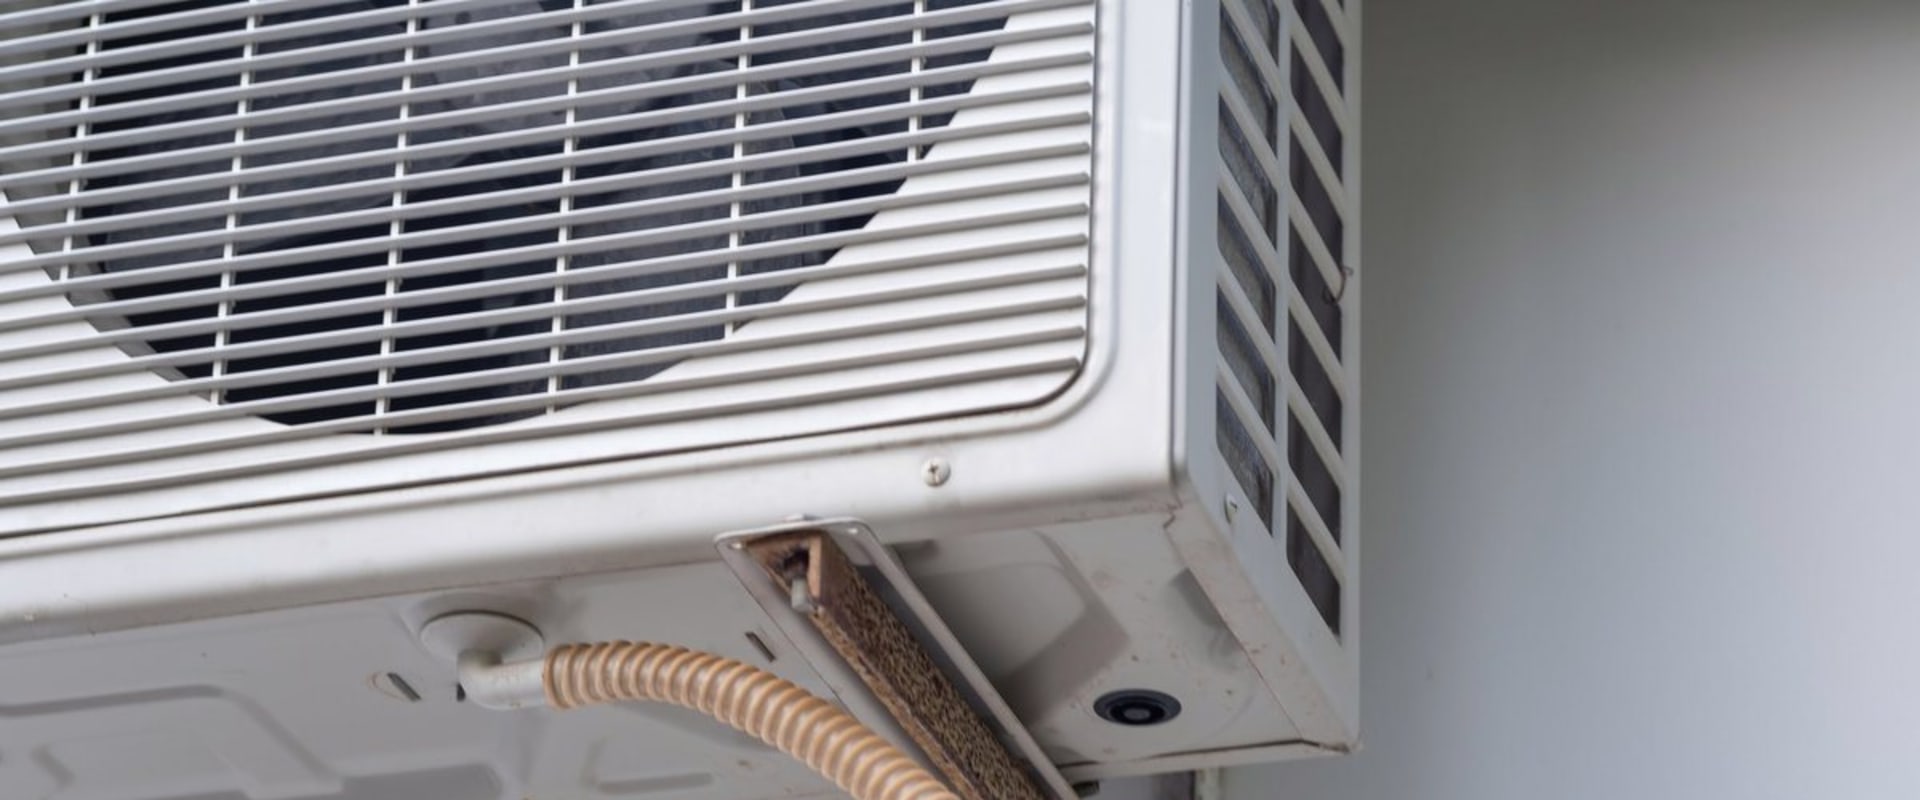 How much does preventive maintenance of air conditioning cost?